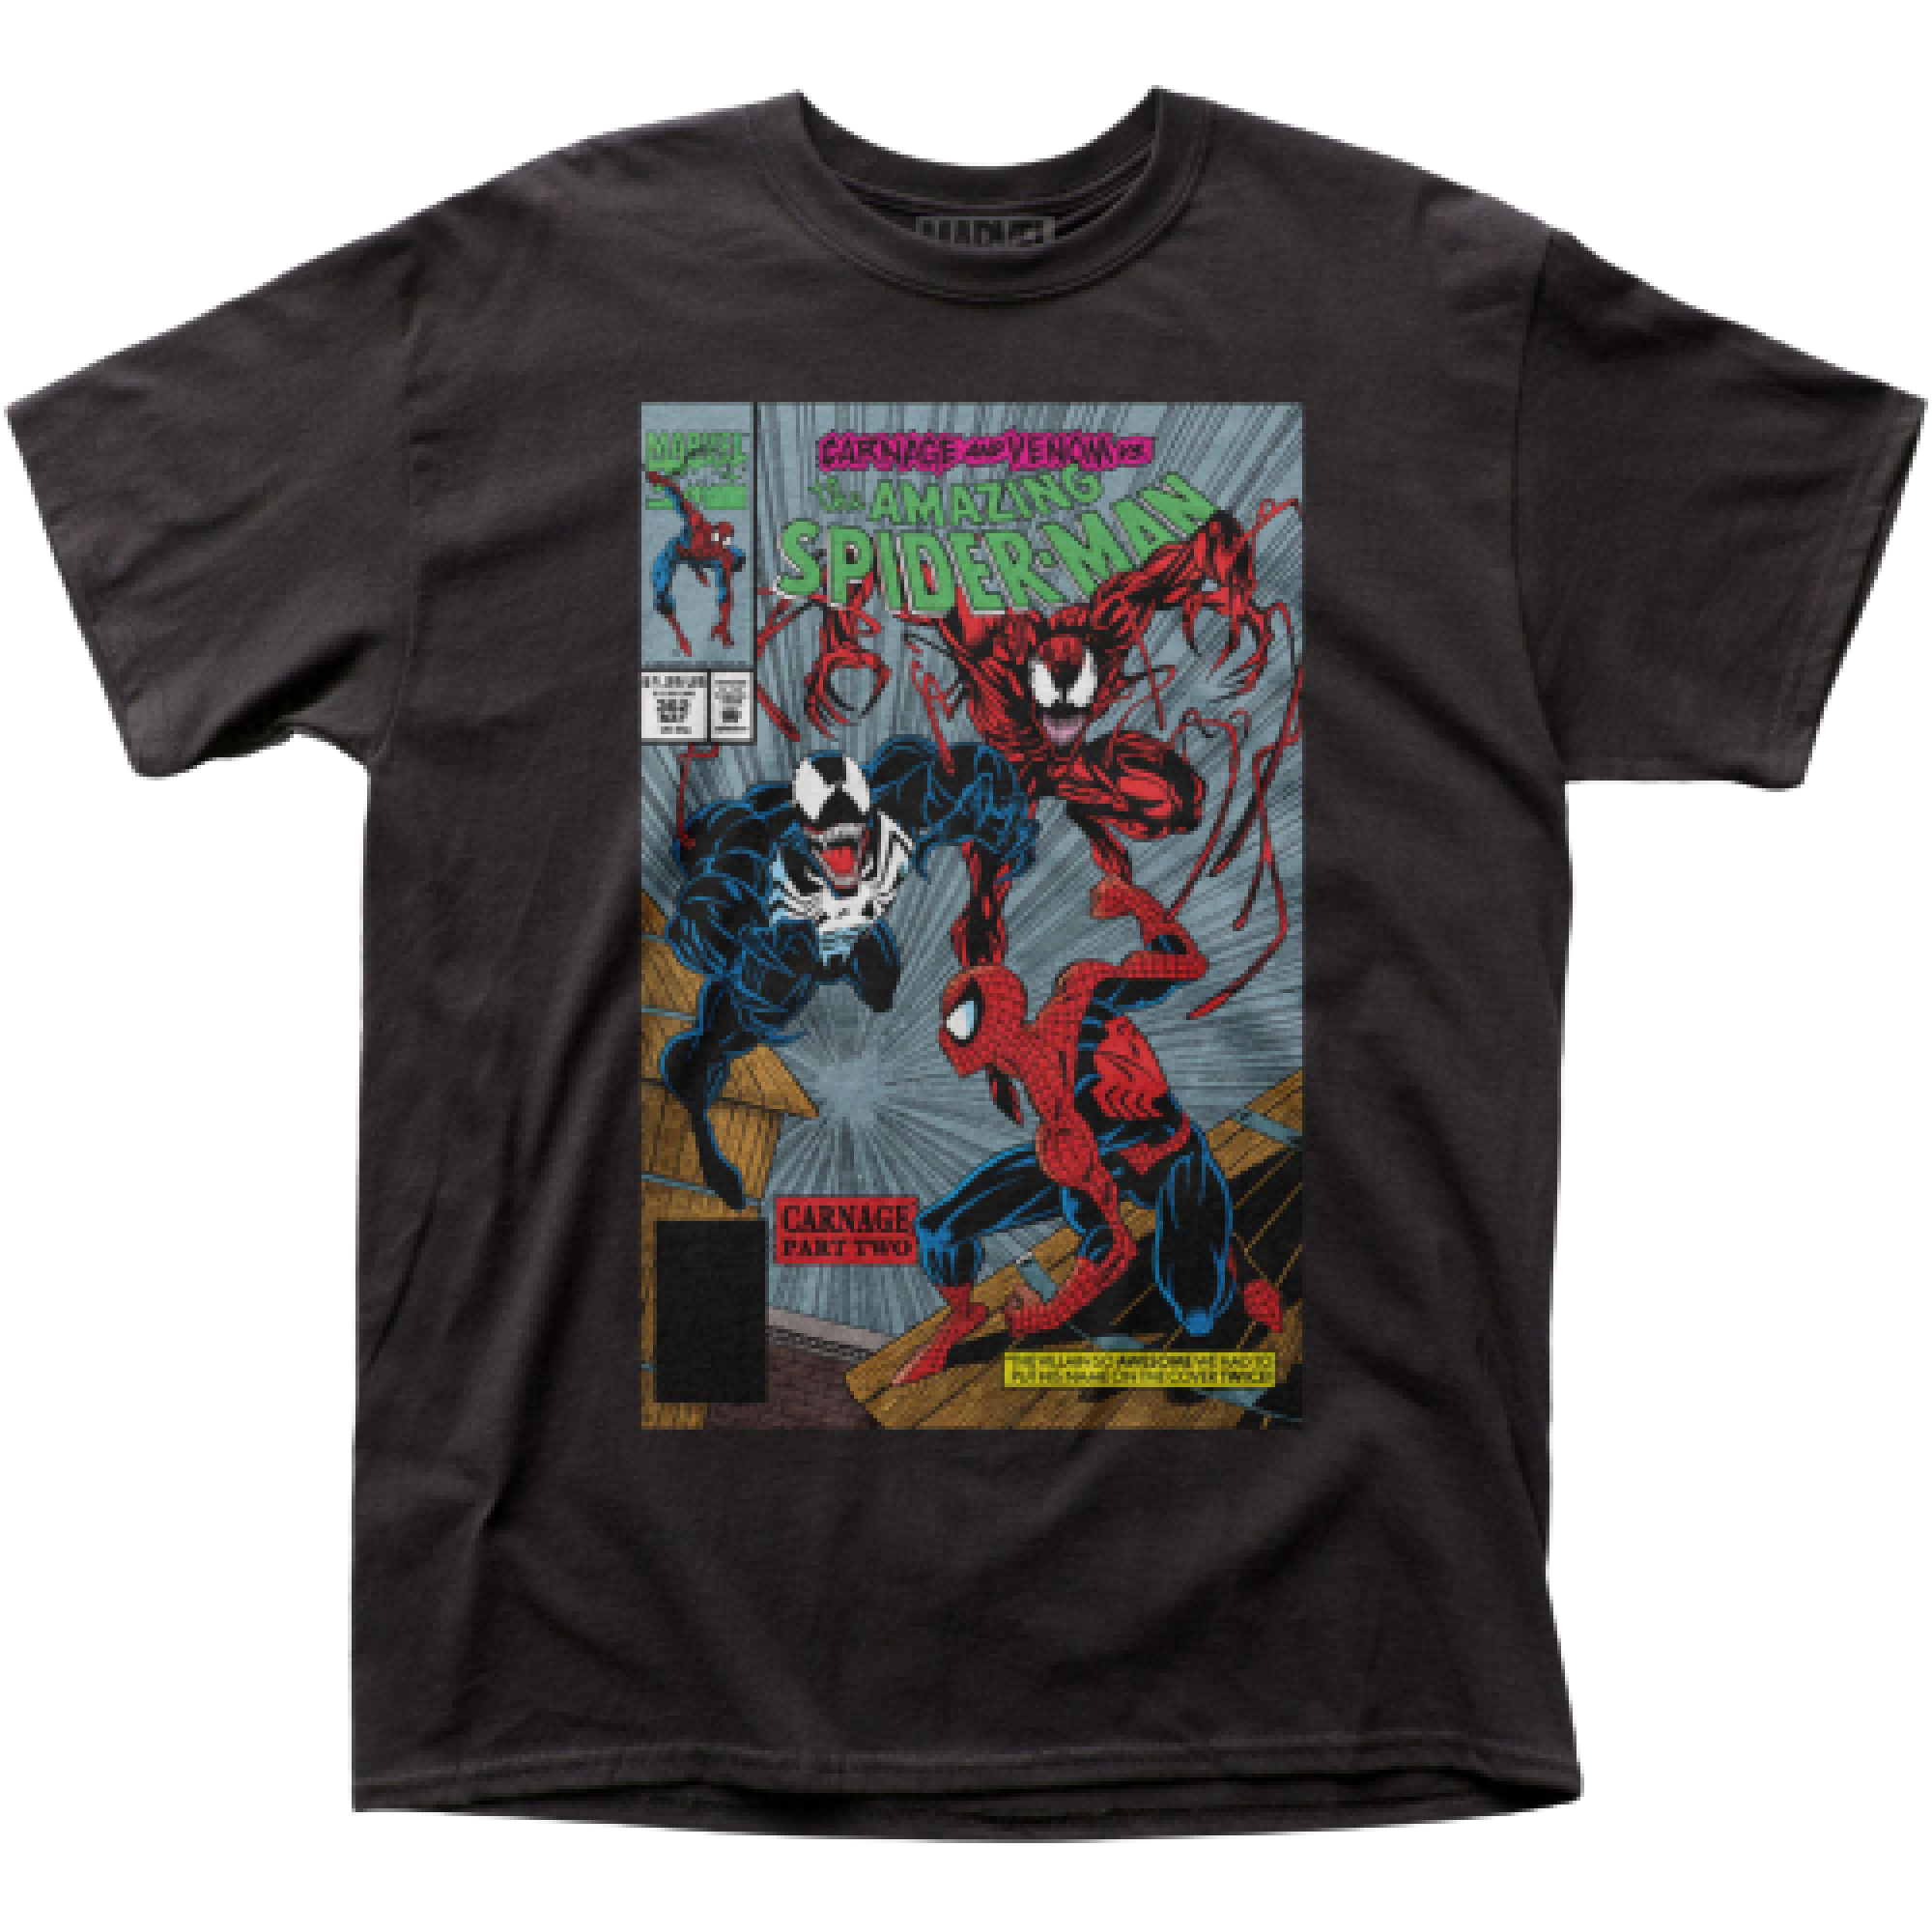 Spider-Man Venom vs Carnage Comic Cover Part Two T-Shirt XLarge 